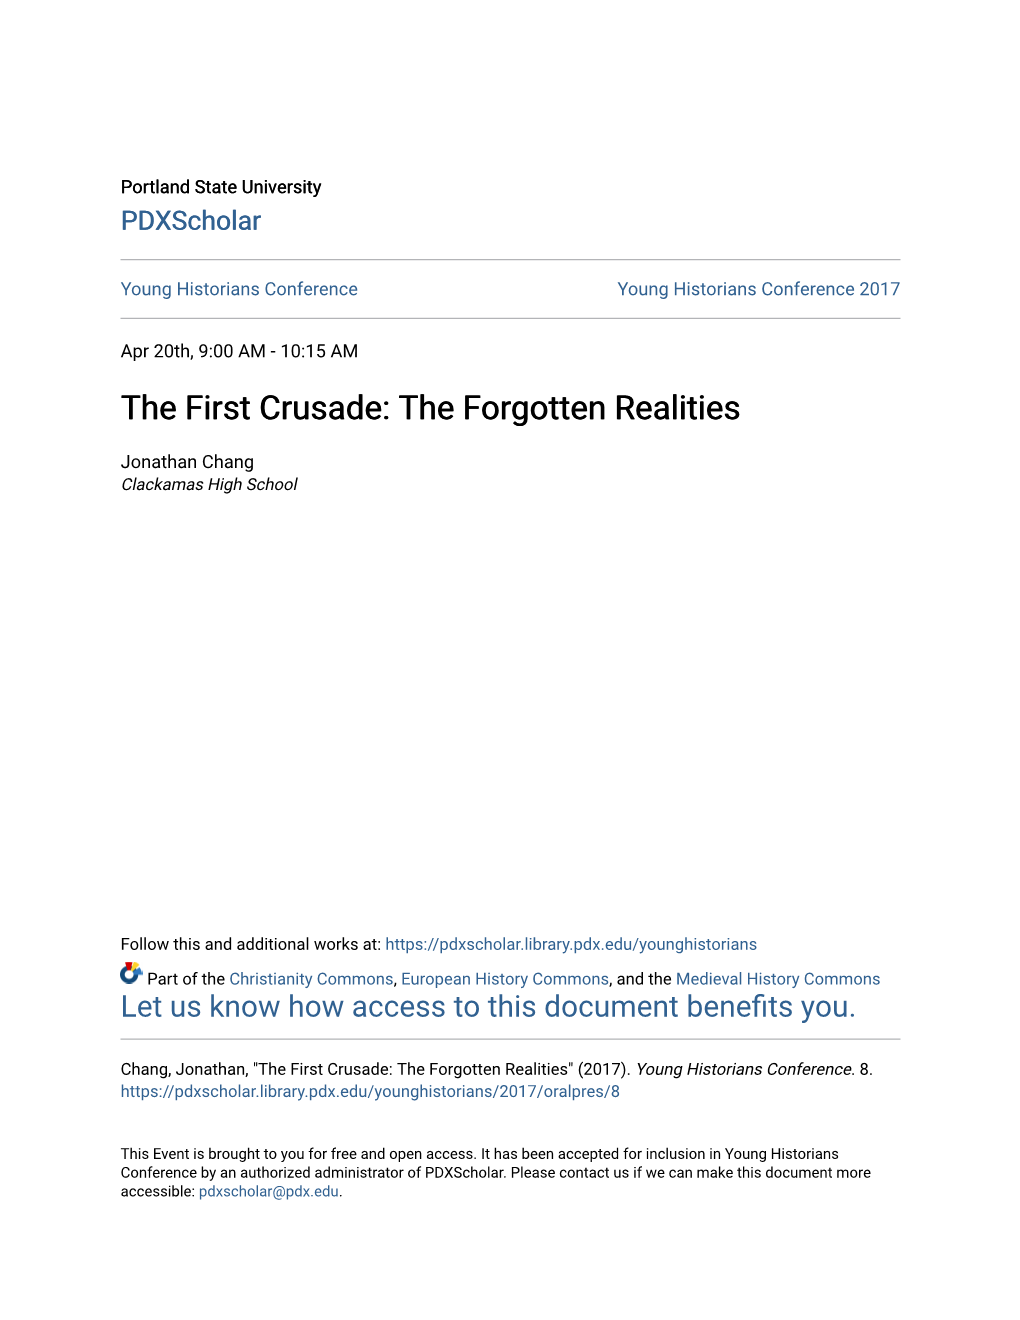 The First Crusade: the Forgotten Realities